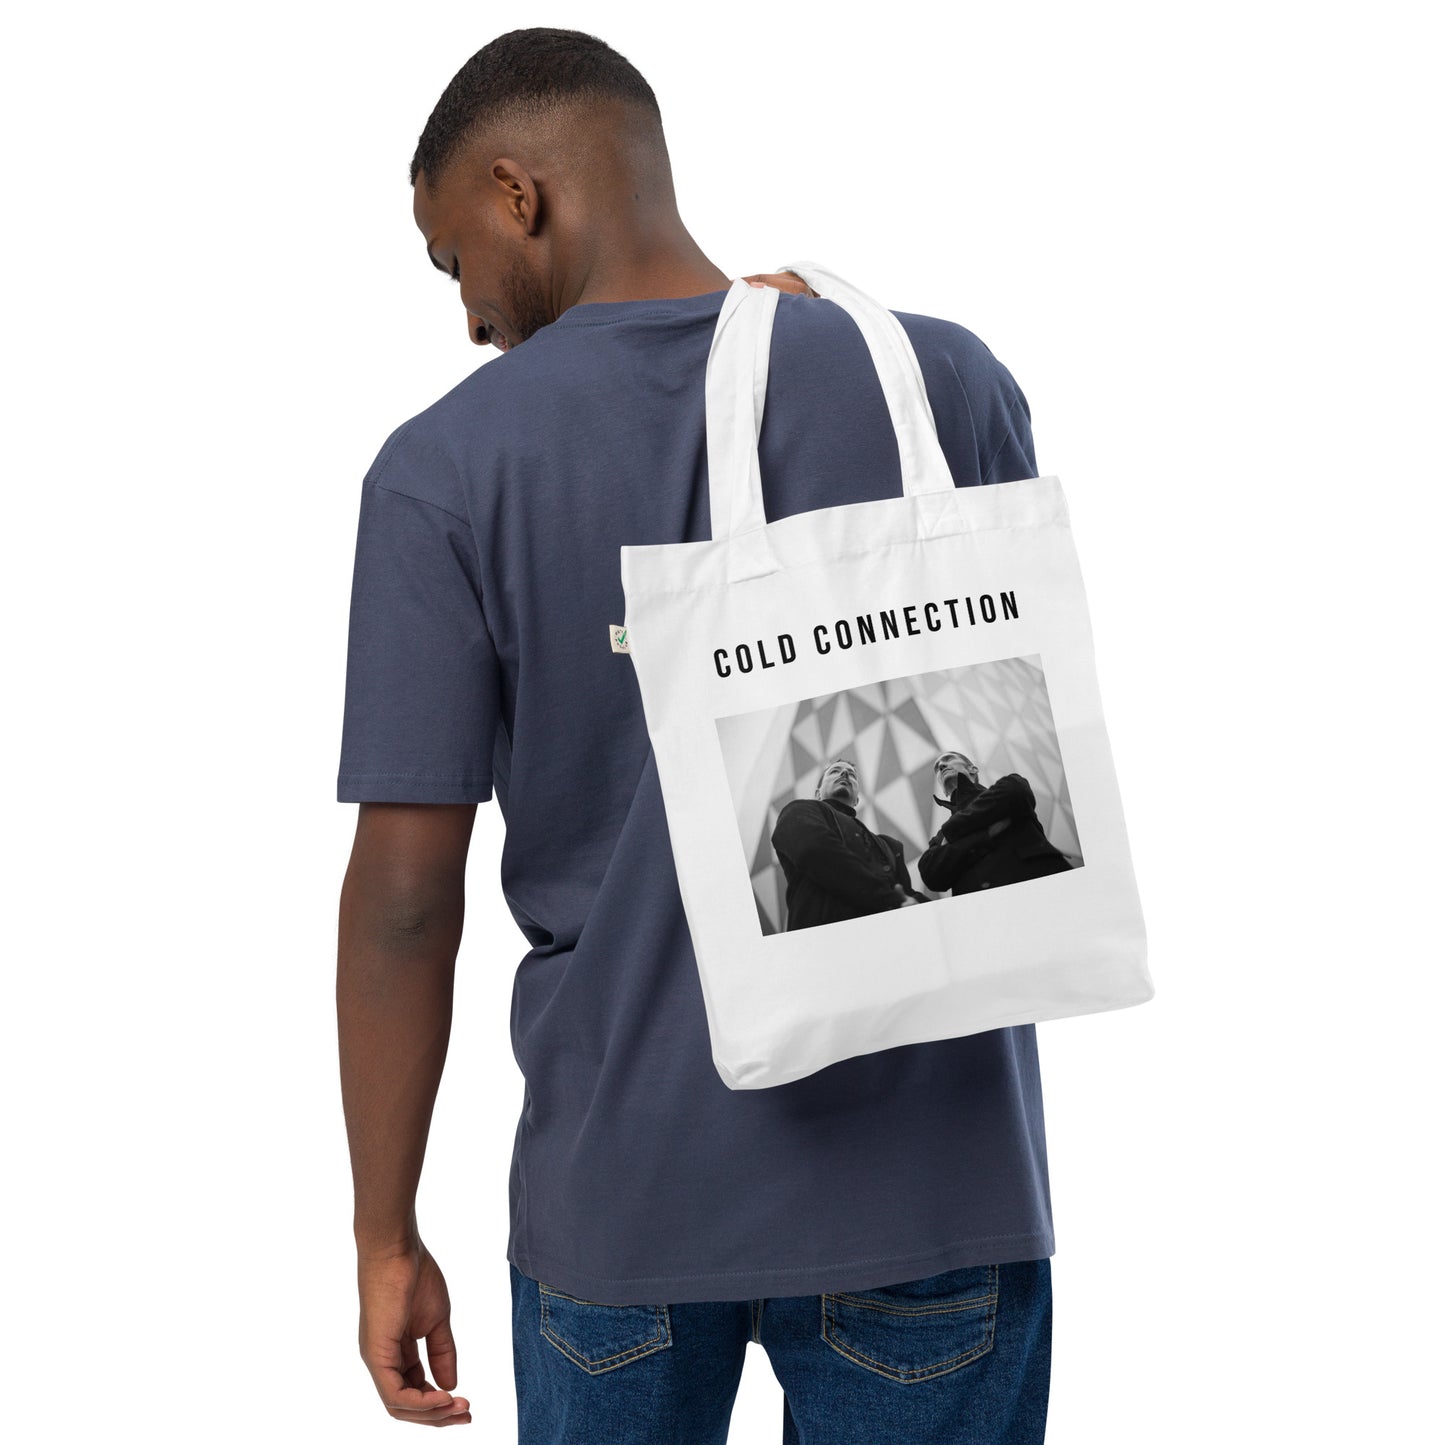 Cold Connection, official band image, Organic fashion tote bag